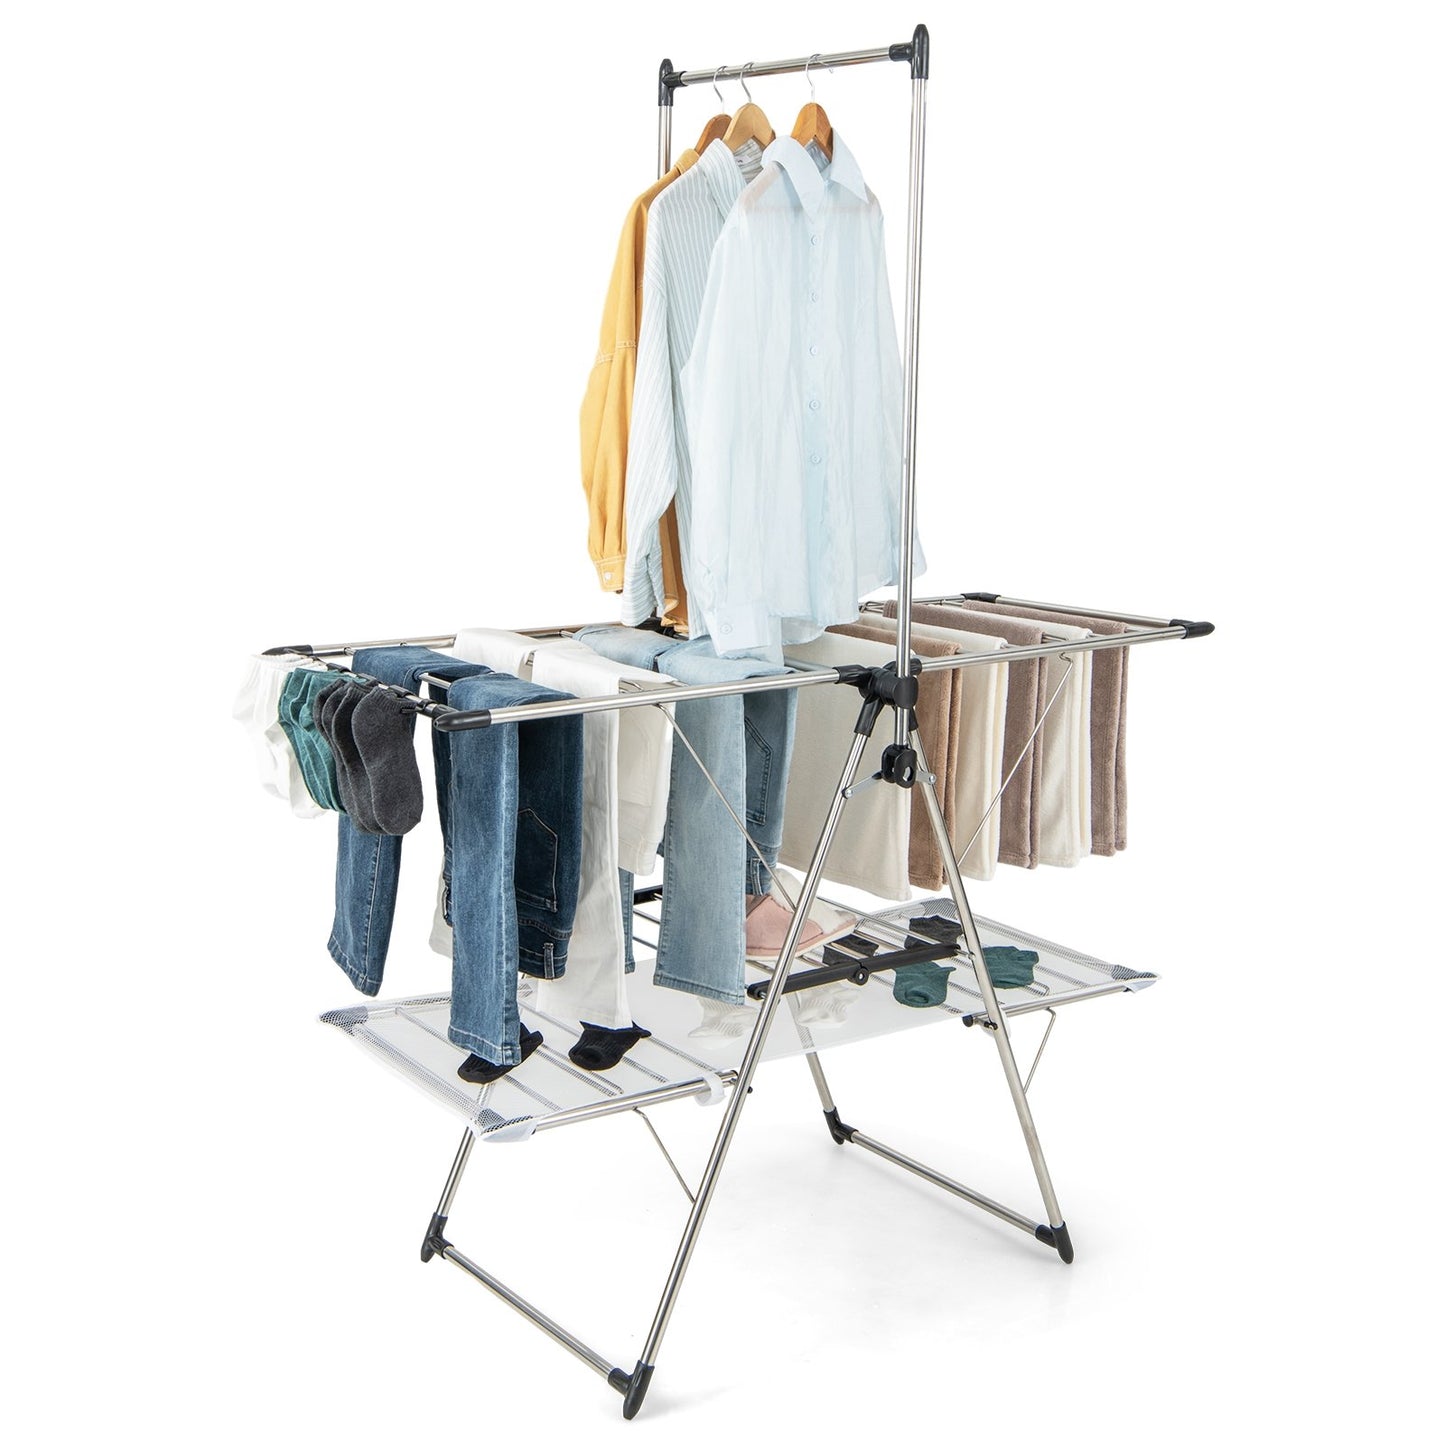 Large Foldable Clothes Drying Rack with Tall Hanging Bar, Silver